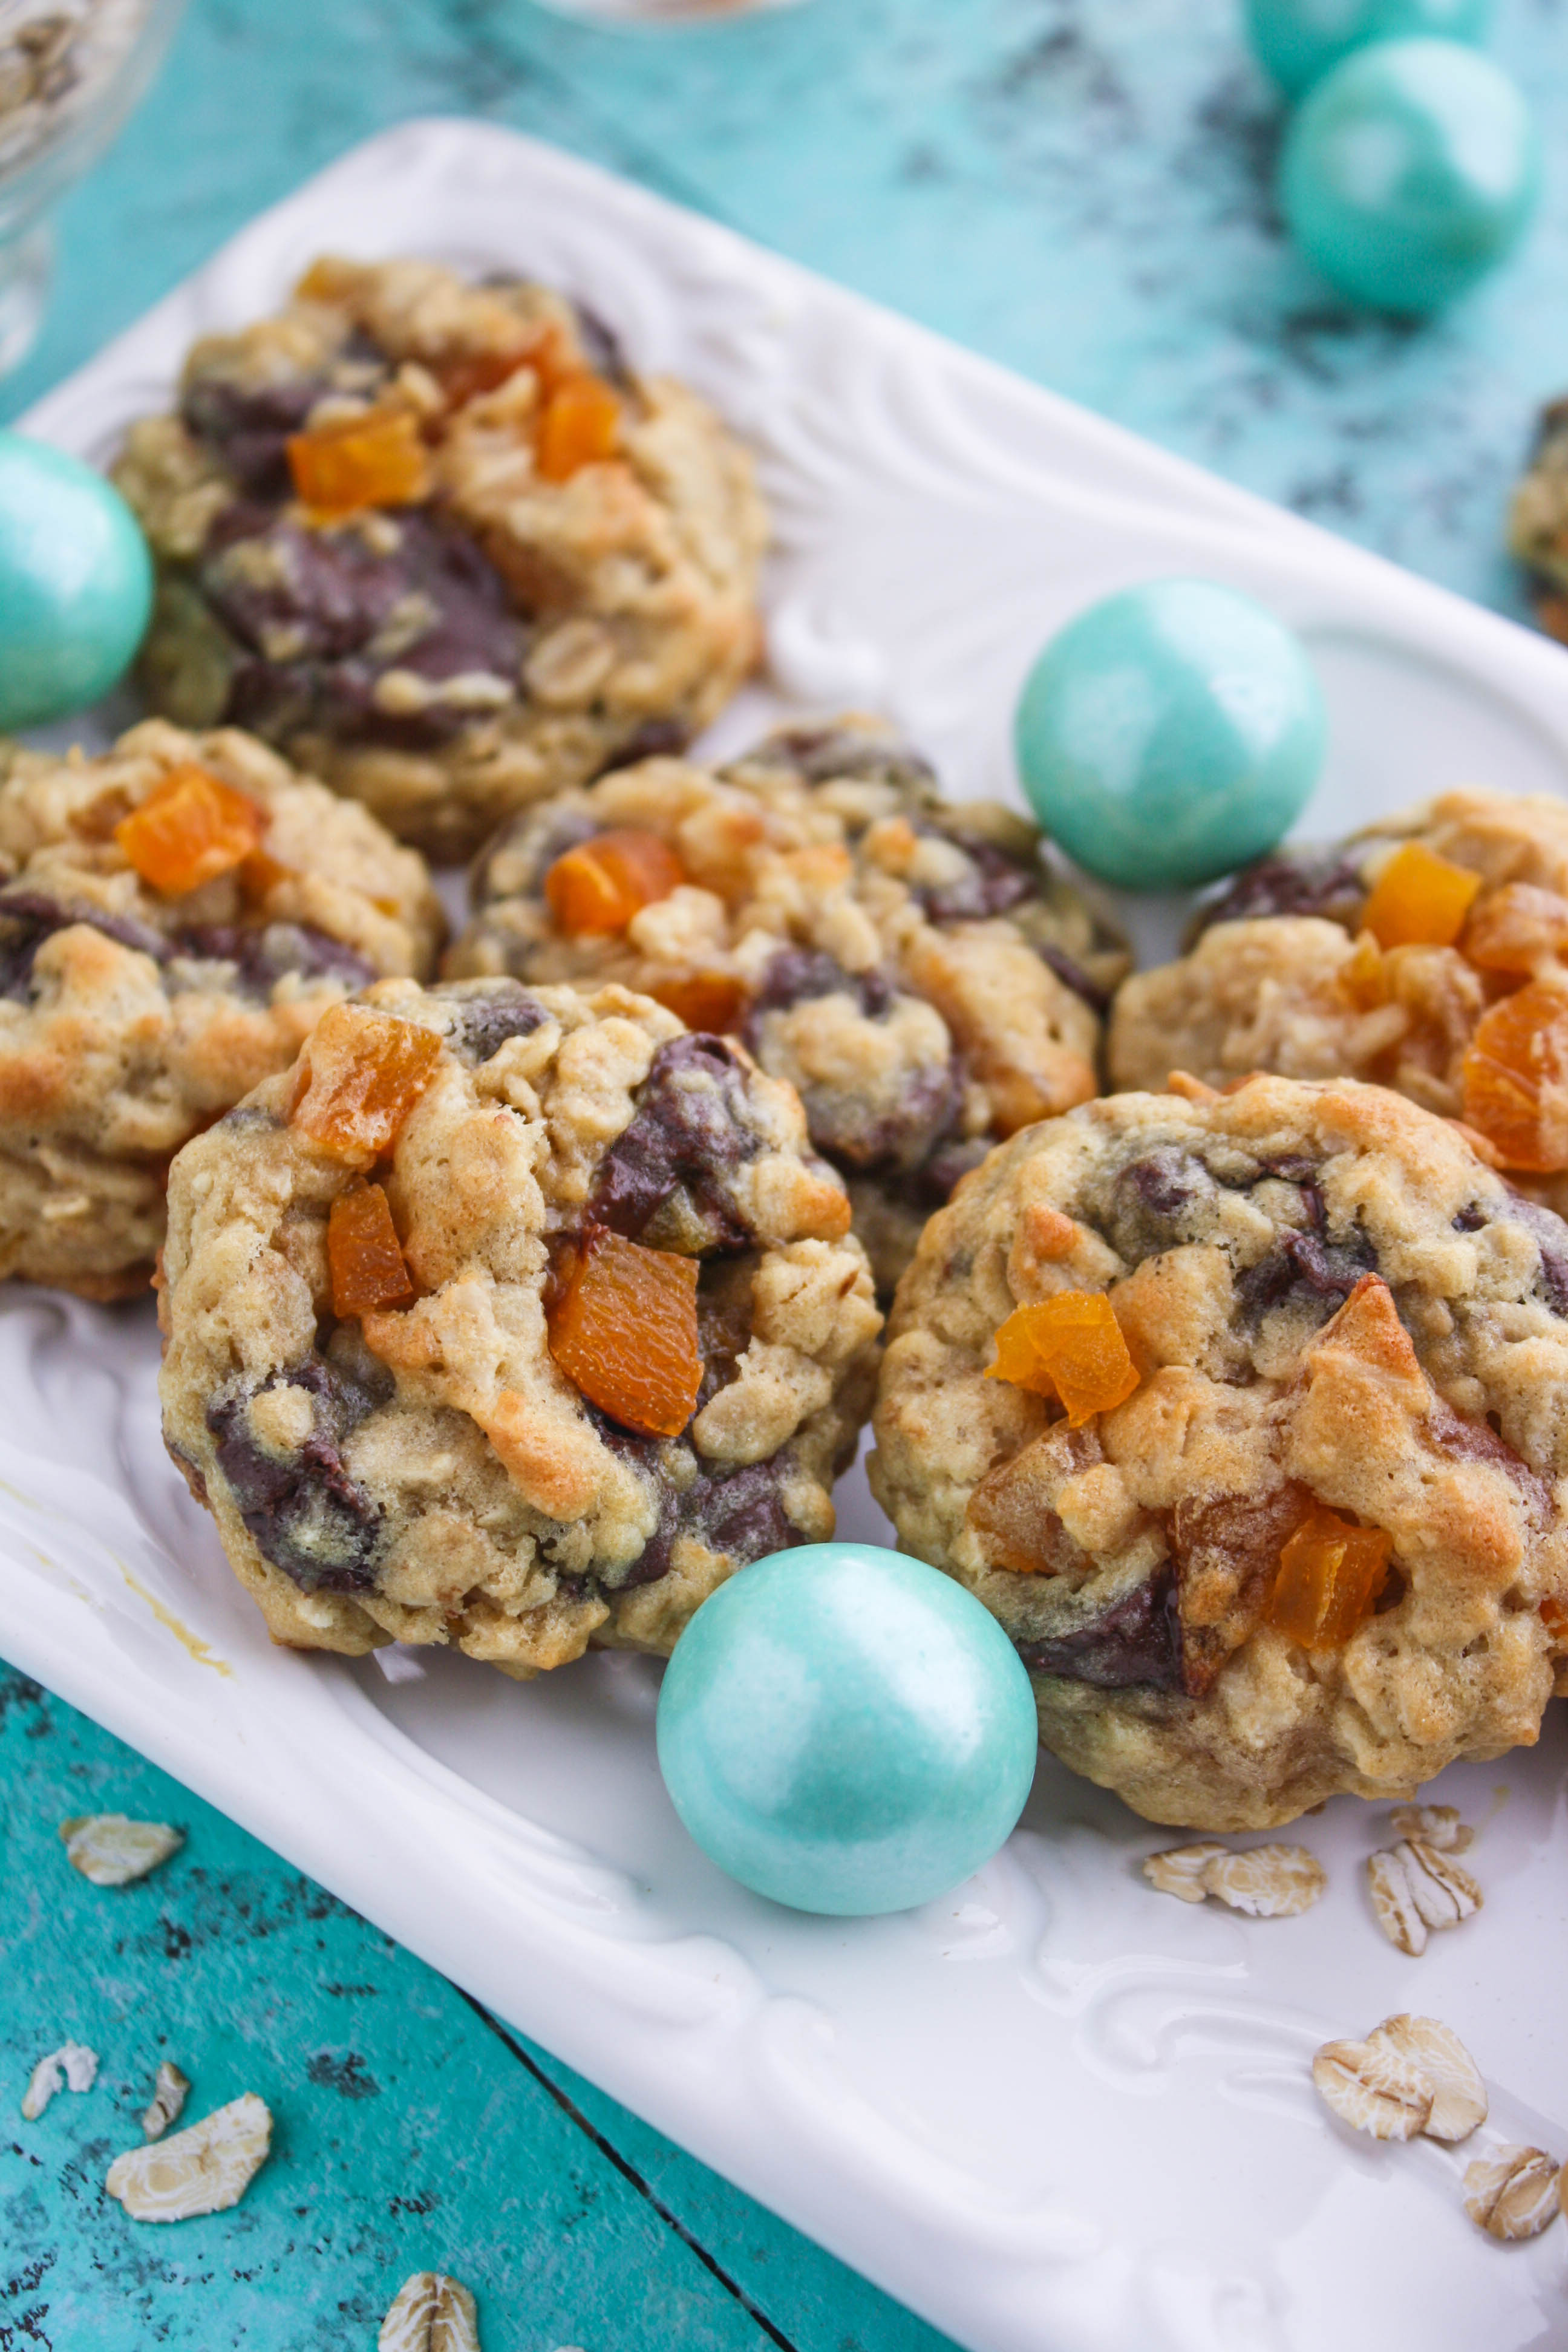 Dark Chocolate Apricot Oatmeal Cookies are a sweet treat anytime of year. Make these fabulous cookies for Valentine's Day!